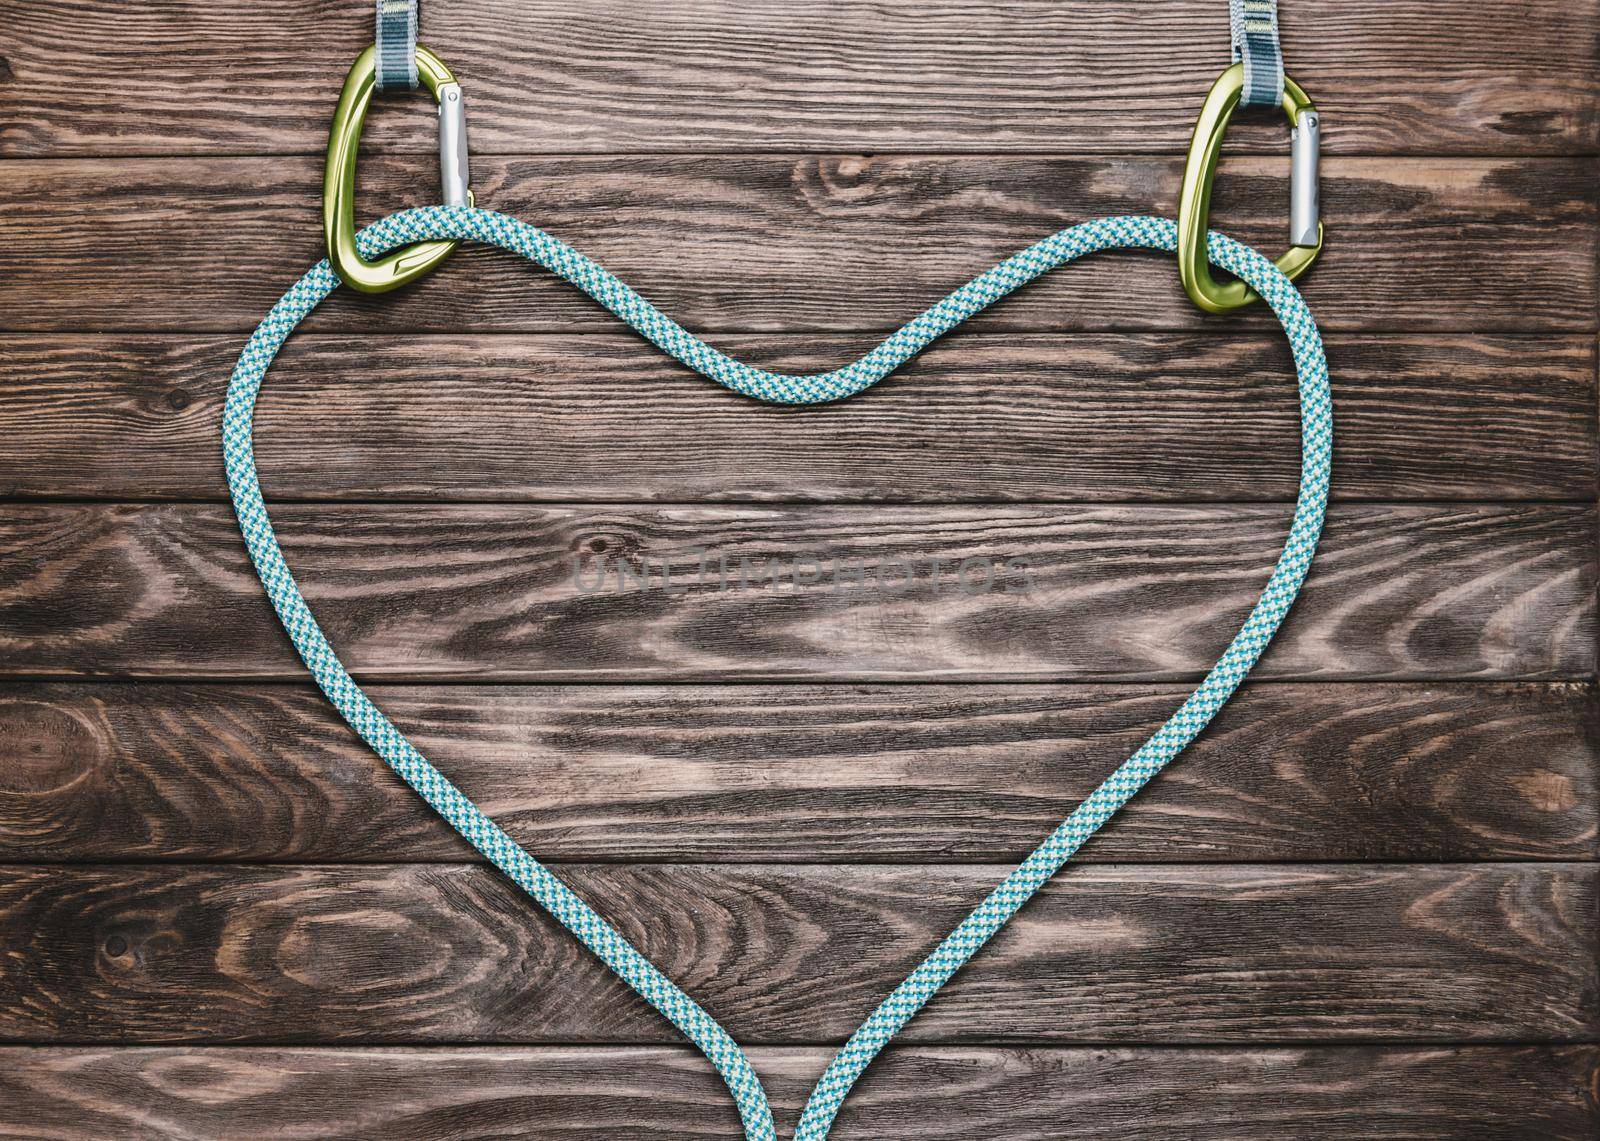 Rope for climbing sport in shape of a heart with carbines on wooden background, top view. Copy-space.